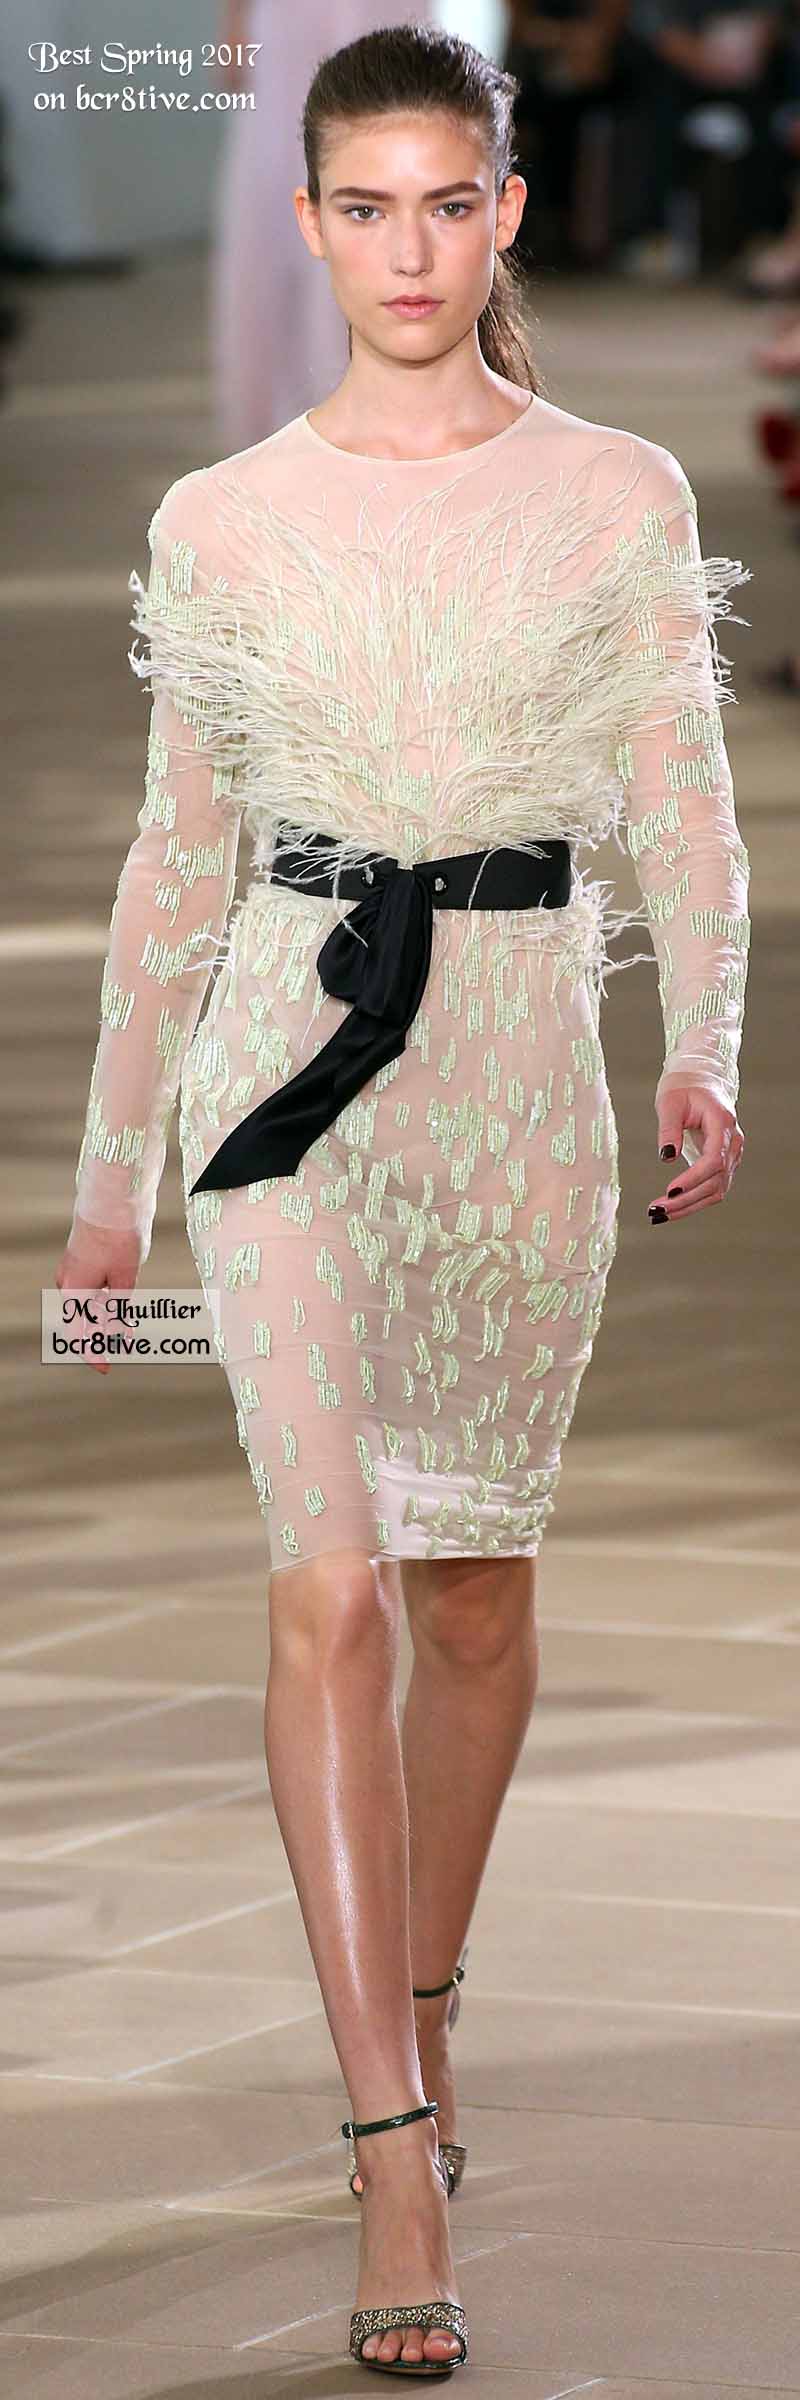 Monique Lhuillier - The Best Looks from New York Fashion Week Spring 2017